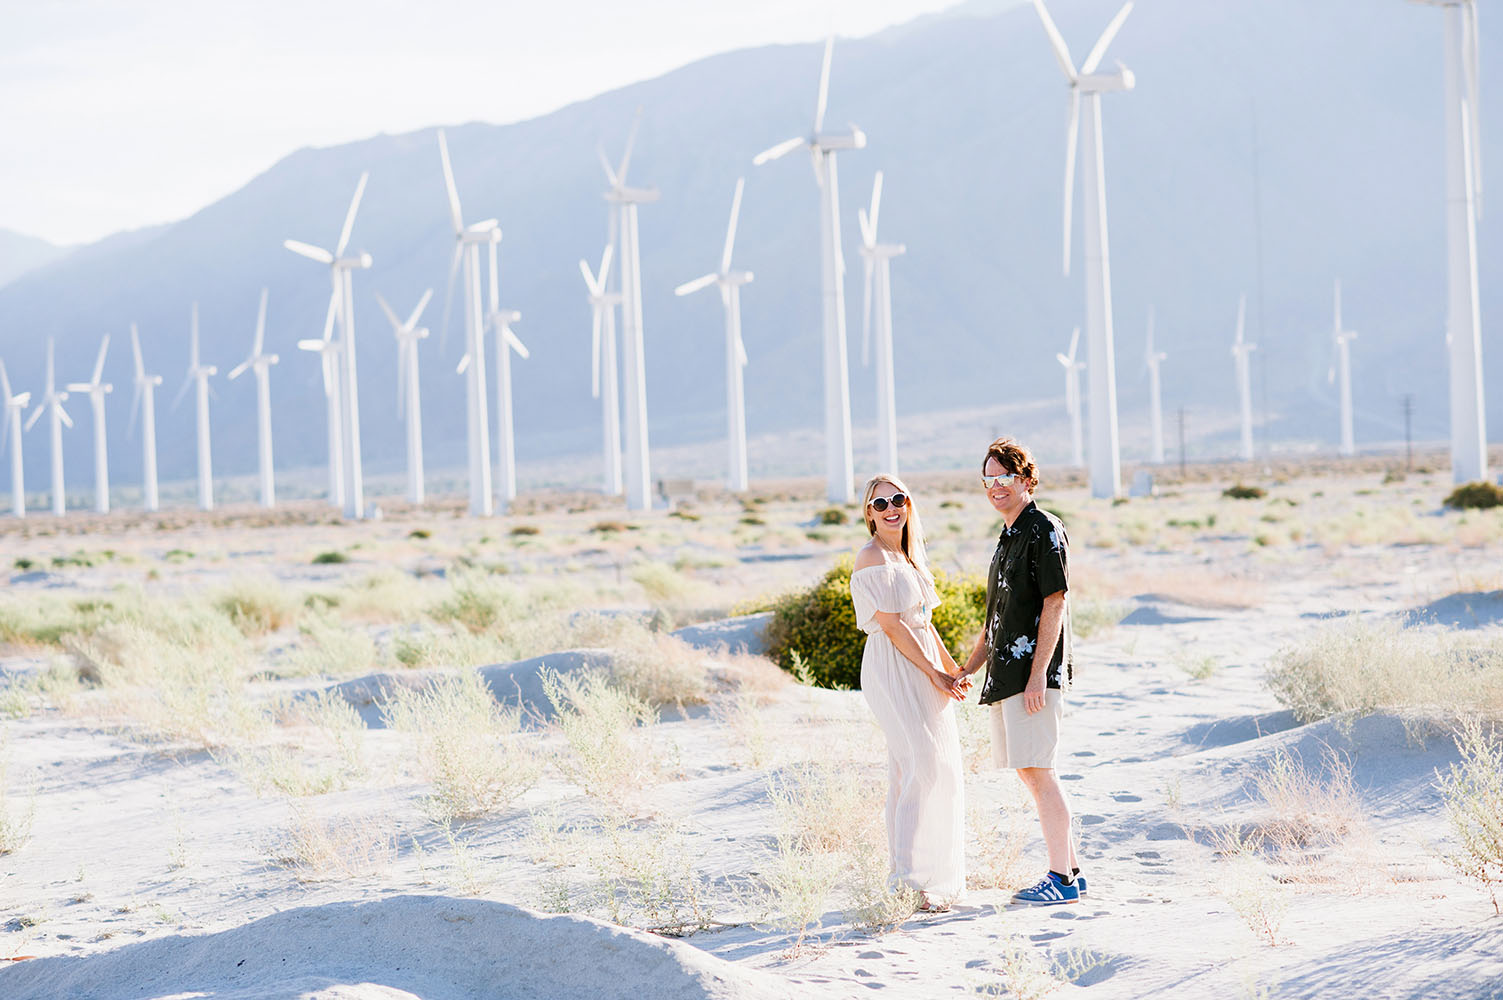 engaged couple in front of wind turbines in California